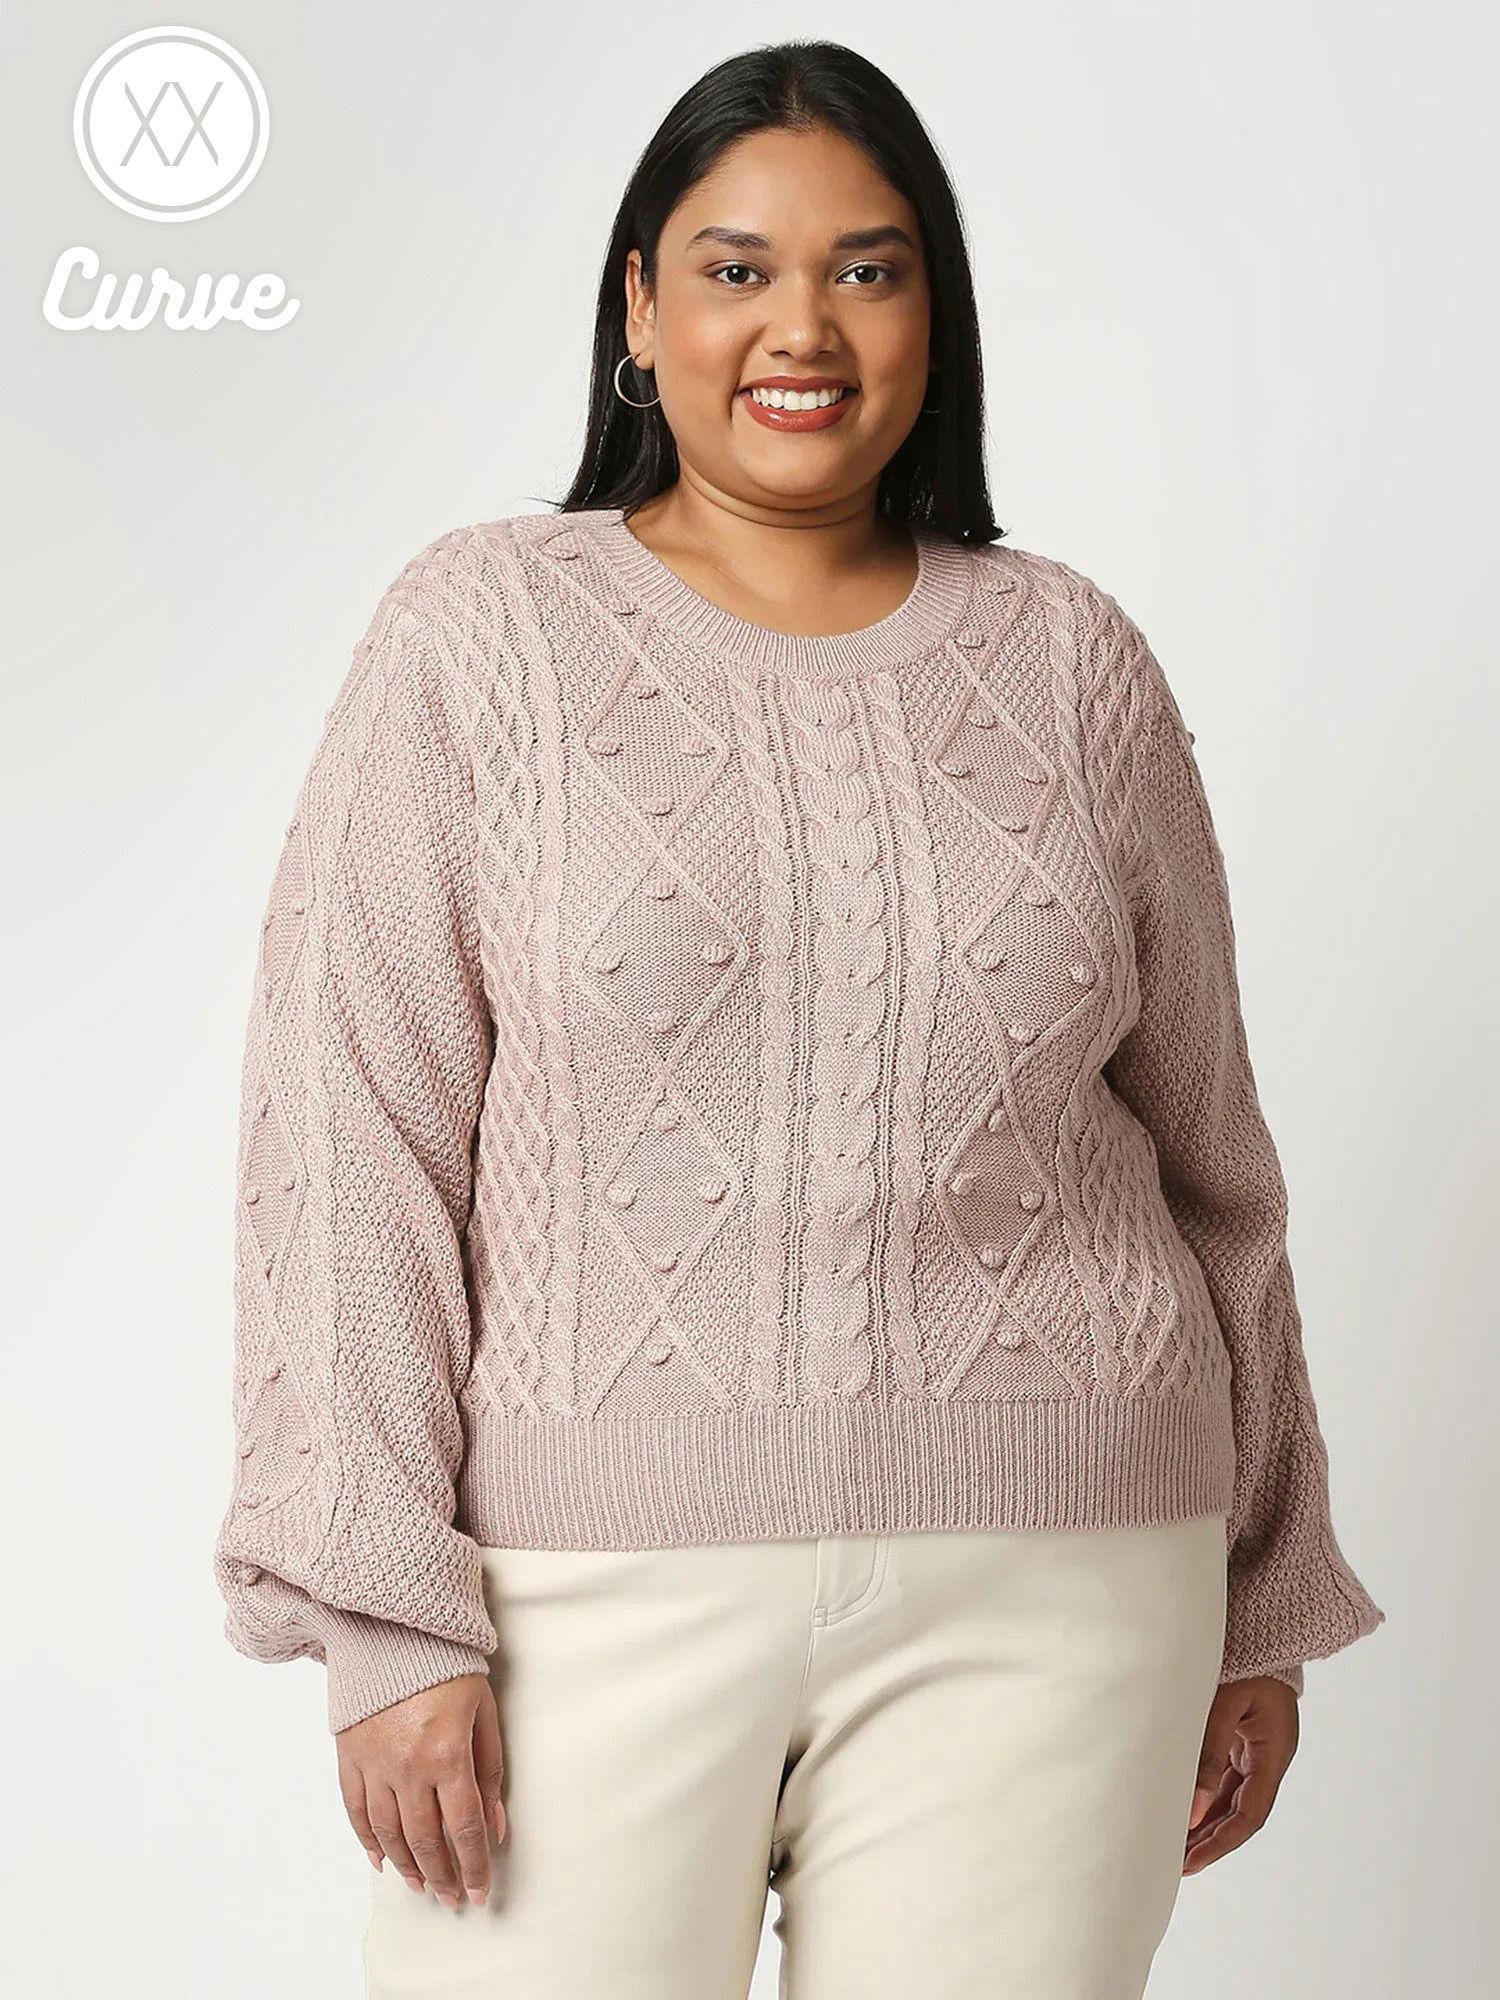 curve stay in style sweater top